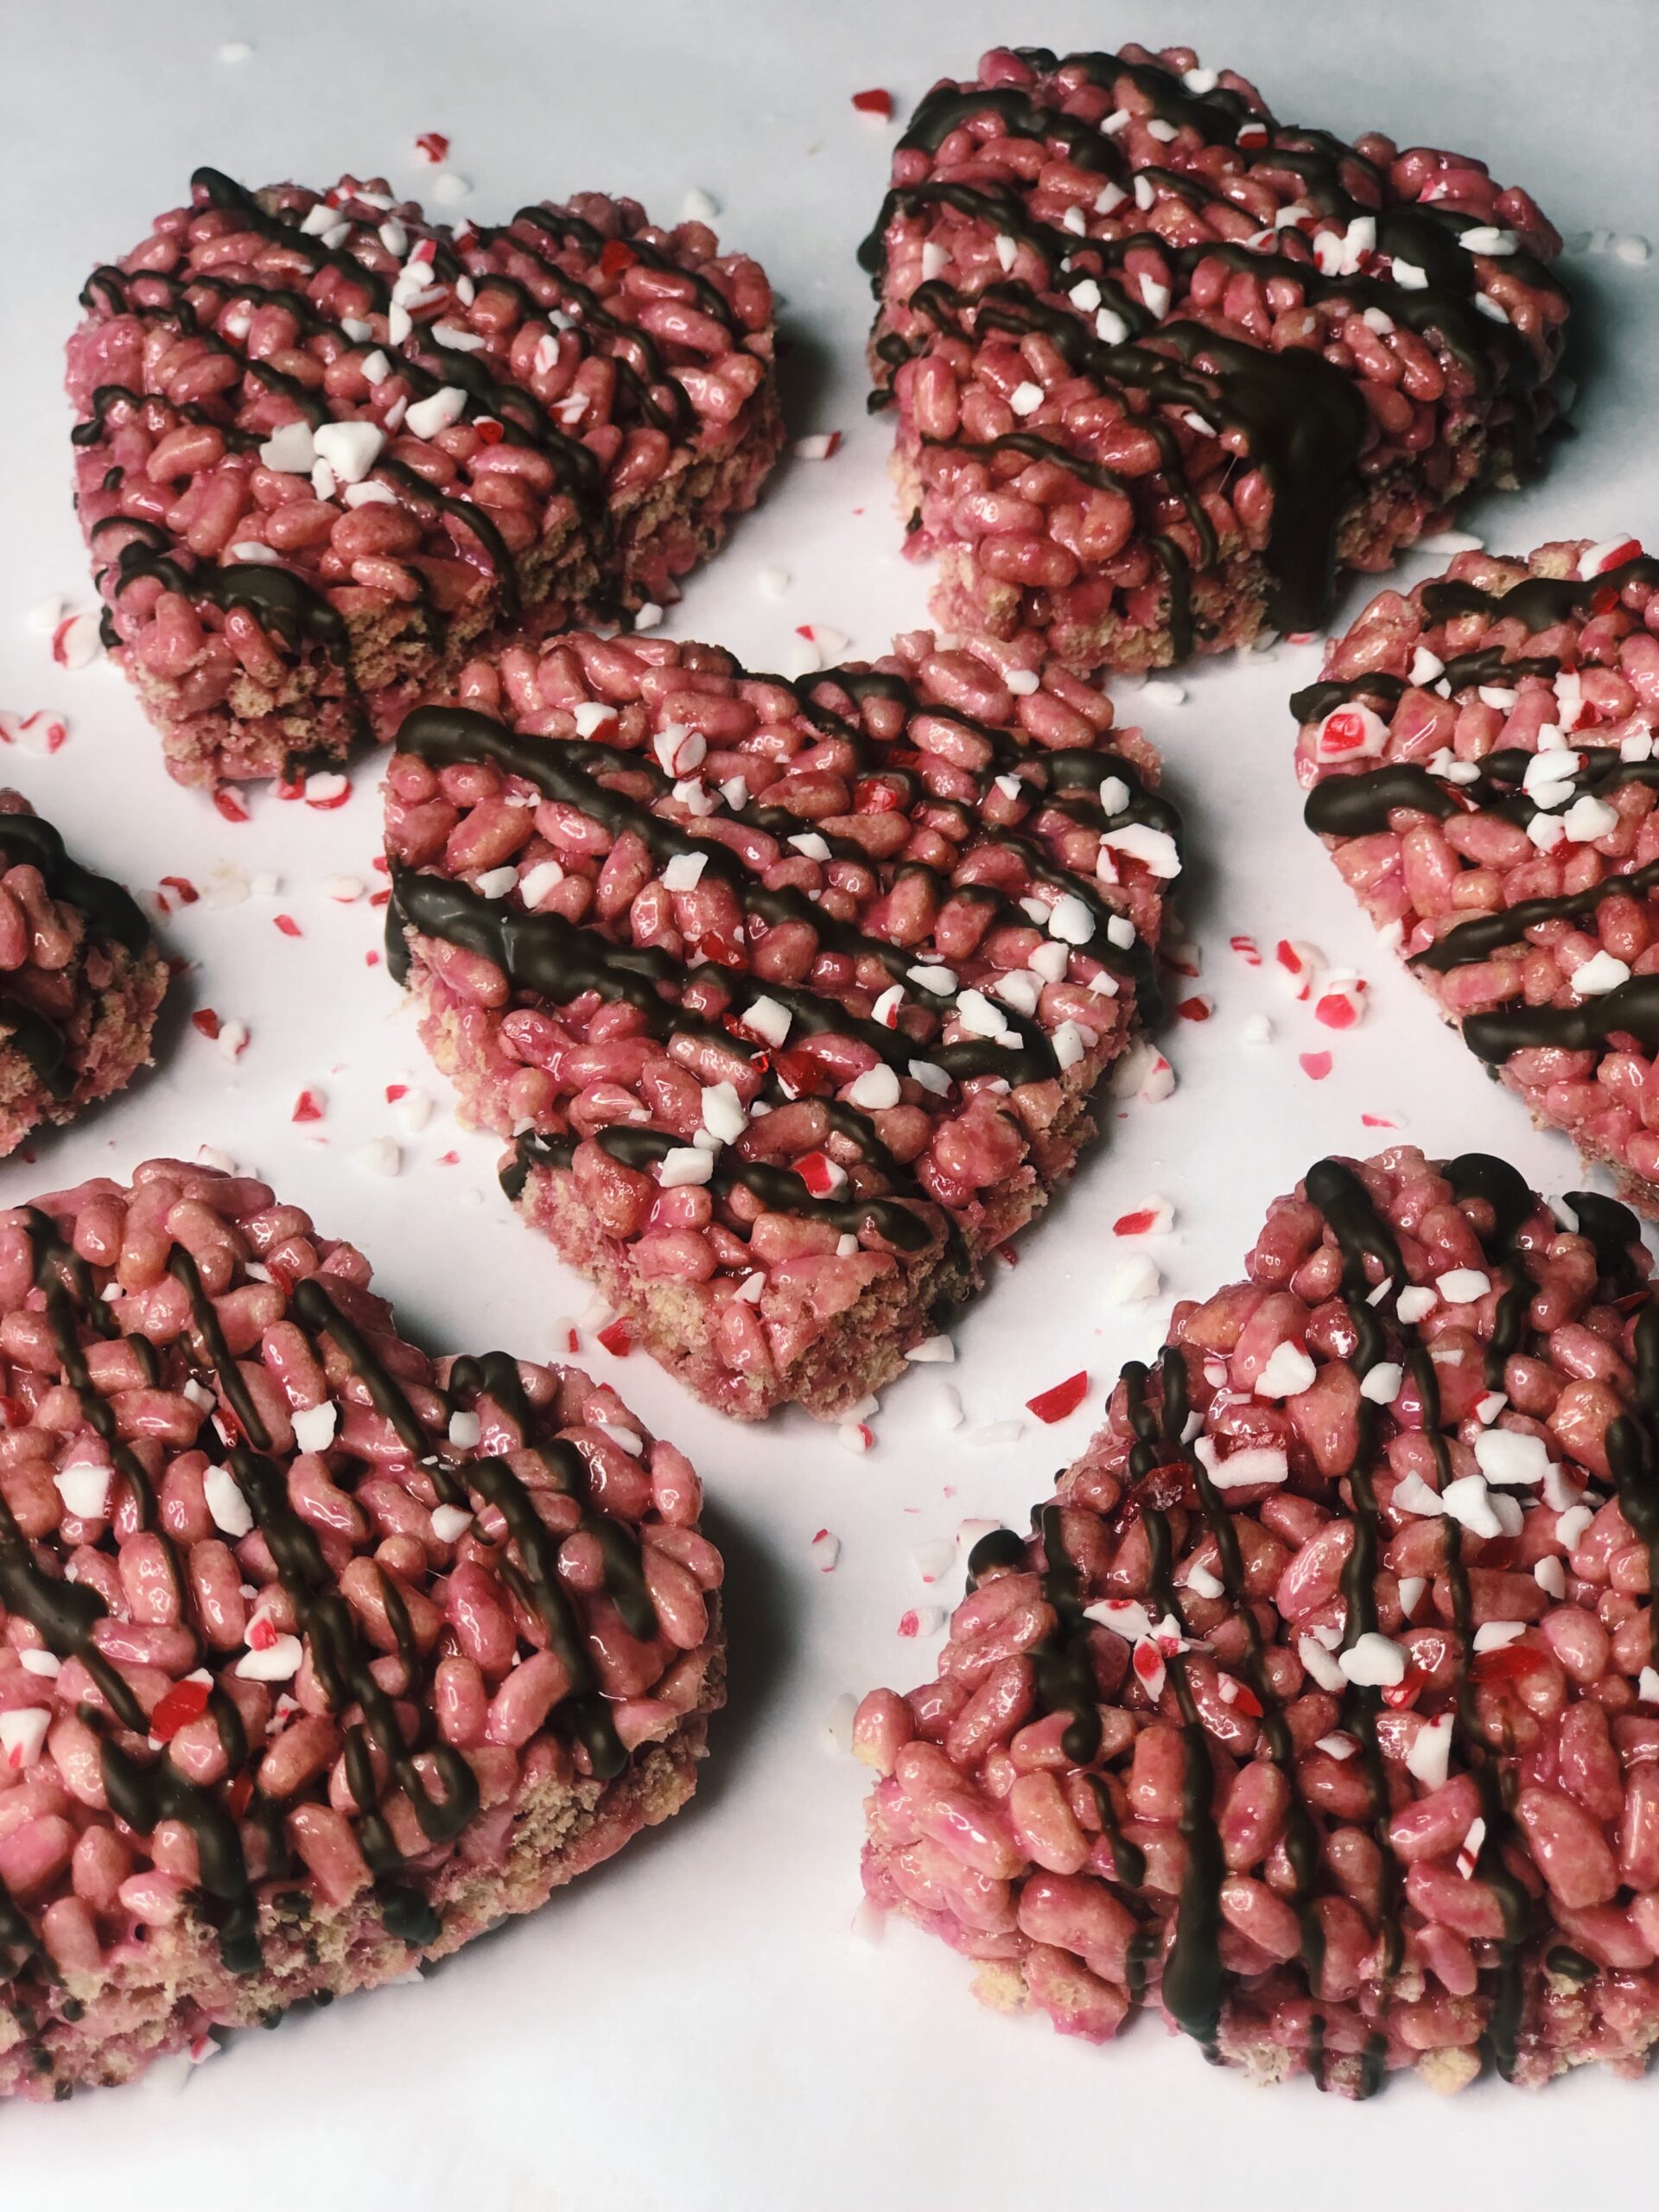 Vegan Rice Krispies Hearts. This recipe is a healthy twist on your basic Rice Krispies treats.